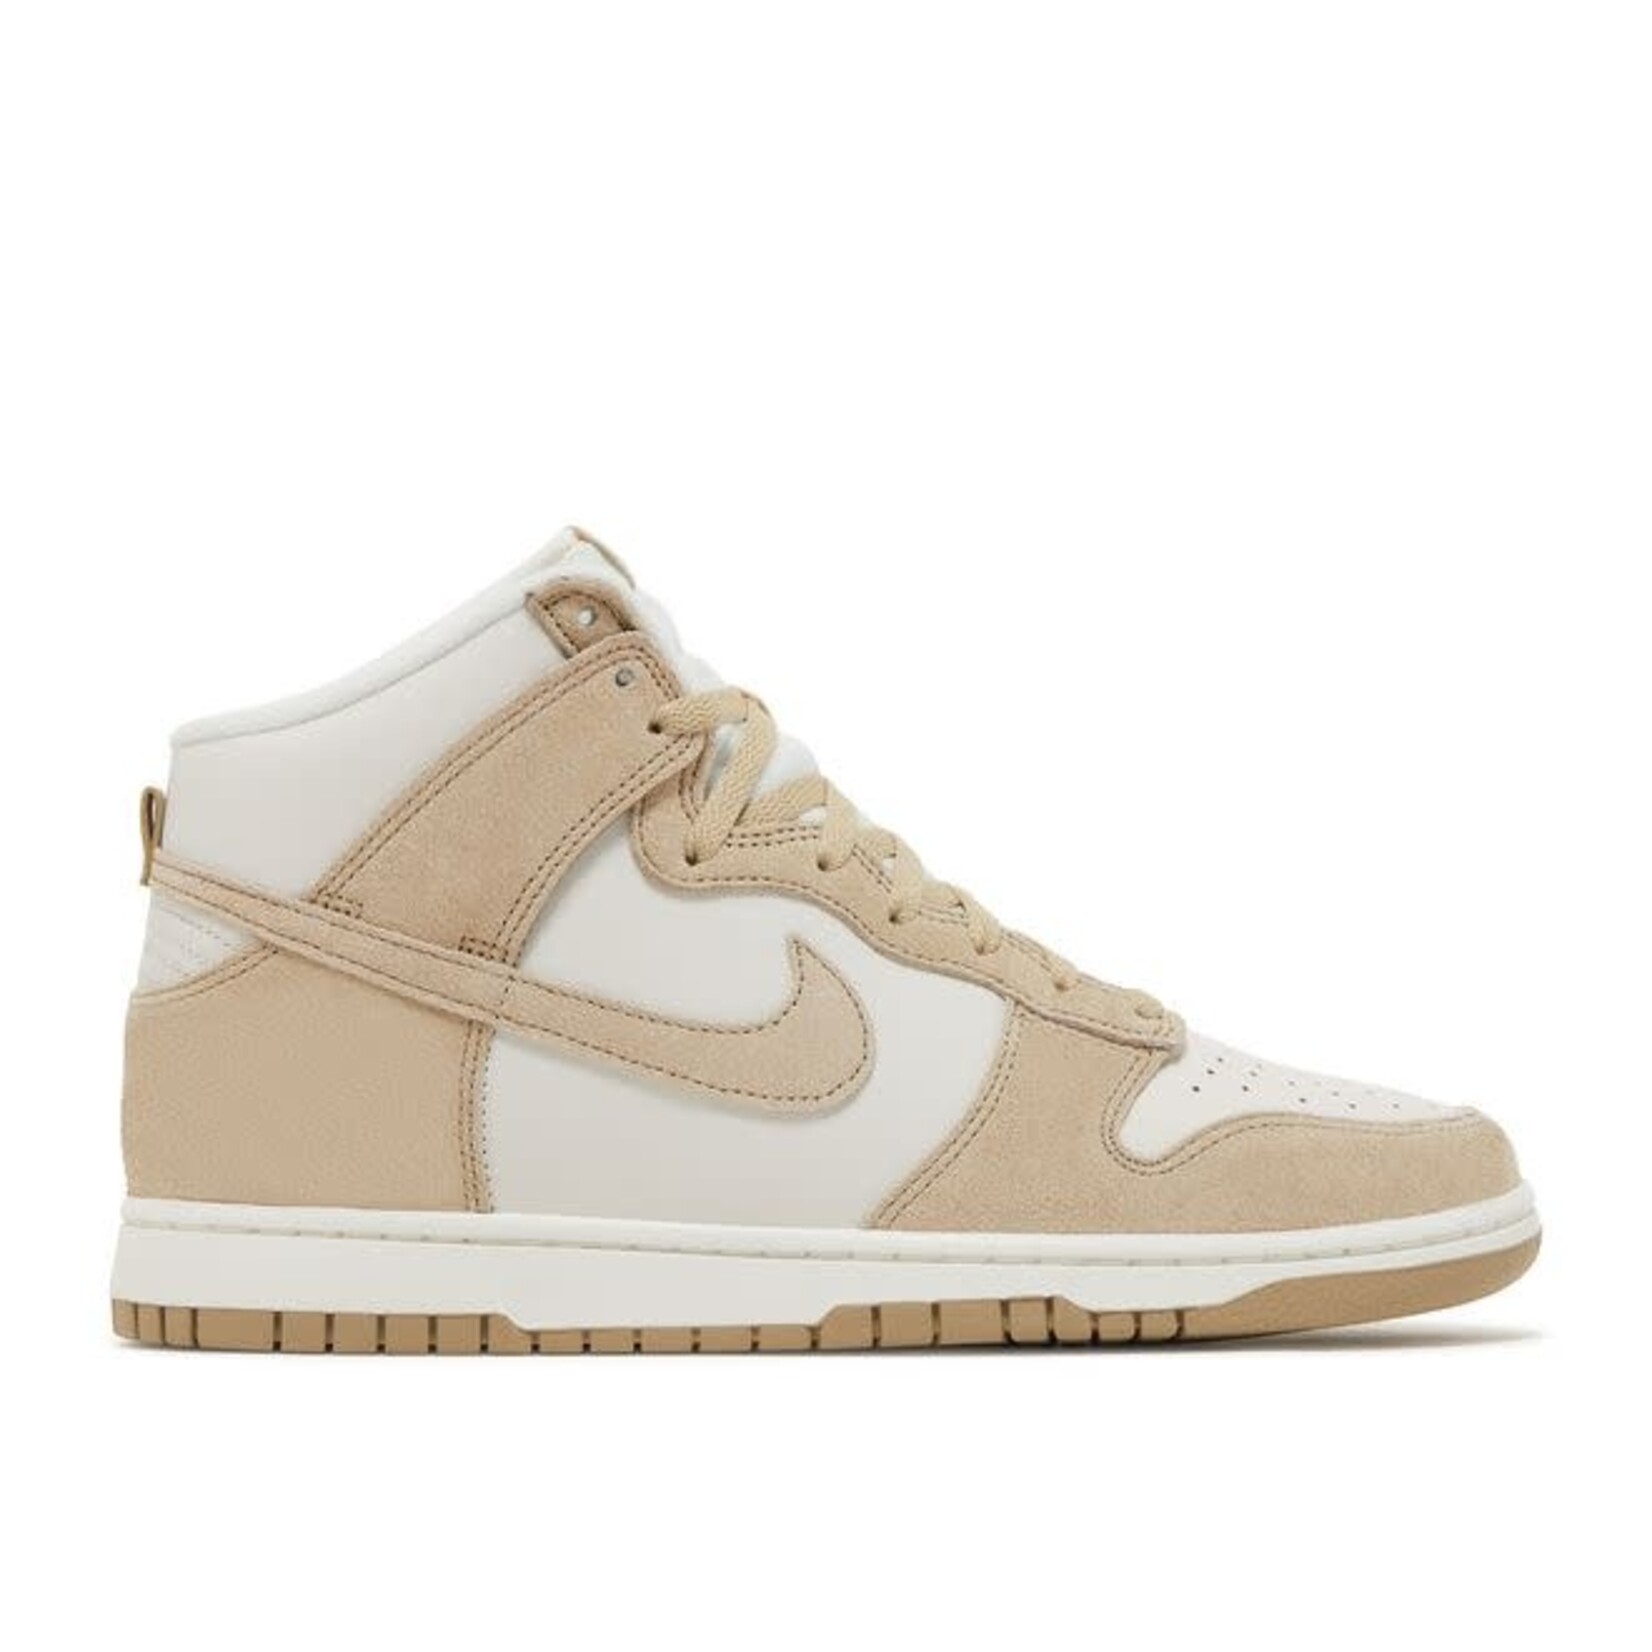 Nike Nike Dunk High Tan Suede White Size 10, DS BRAND NEW